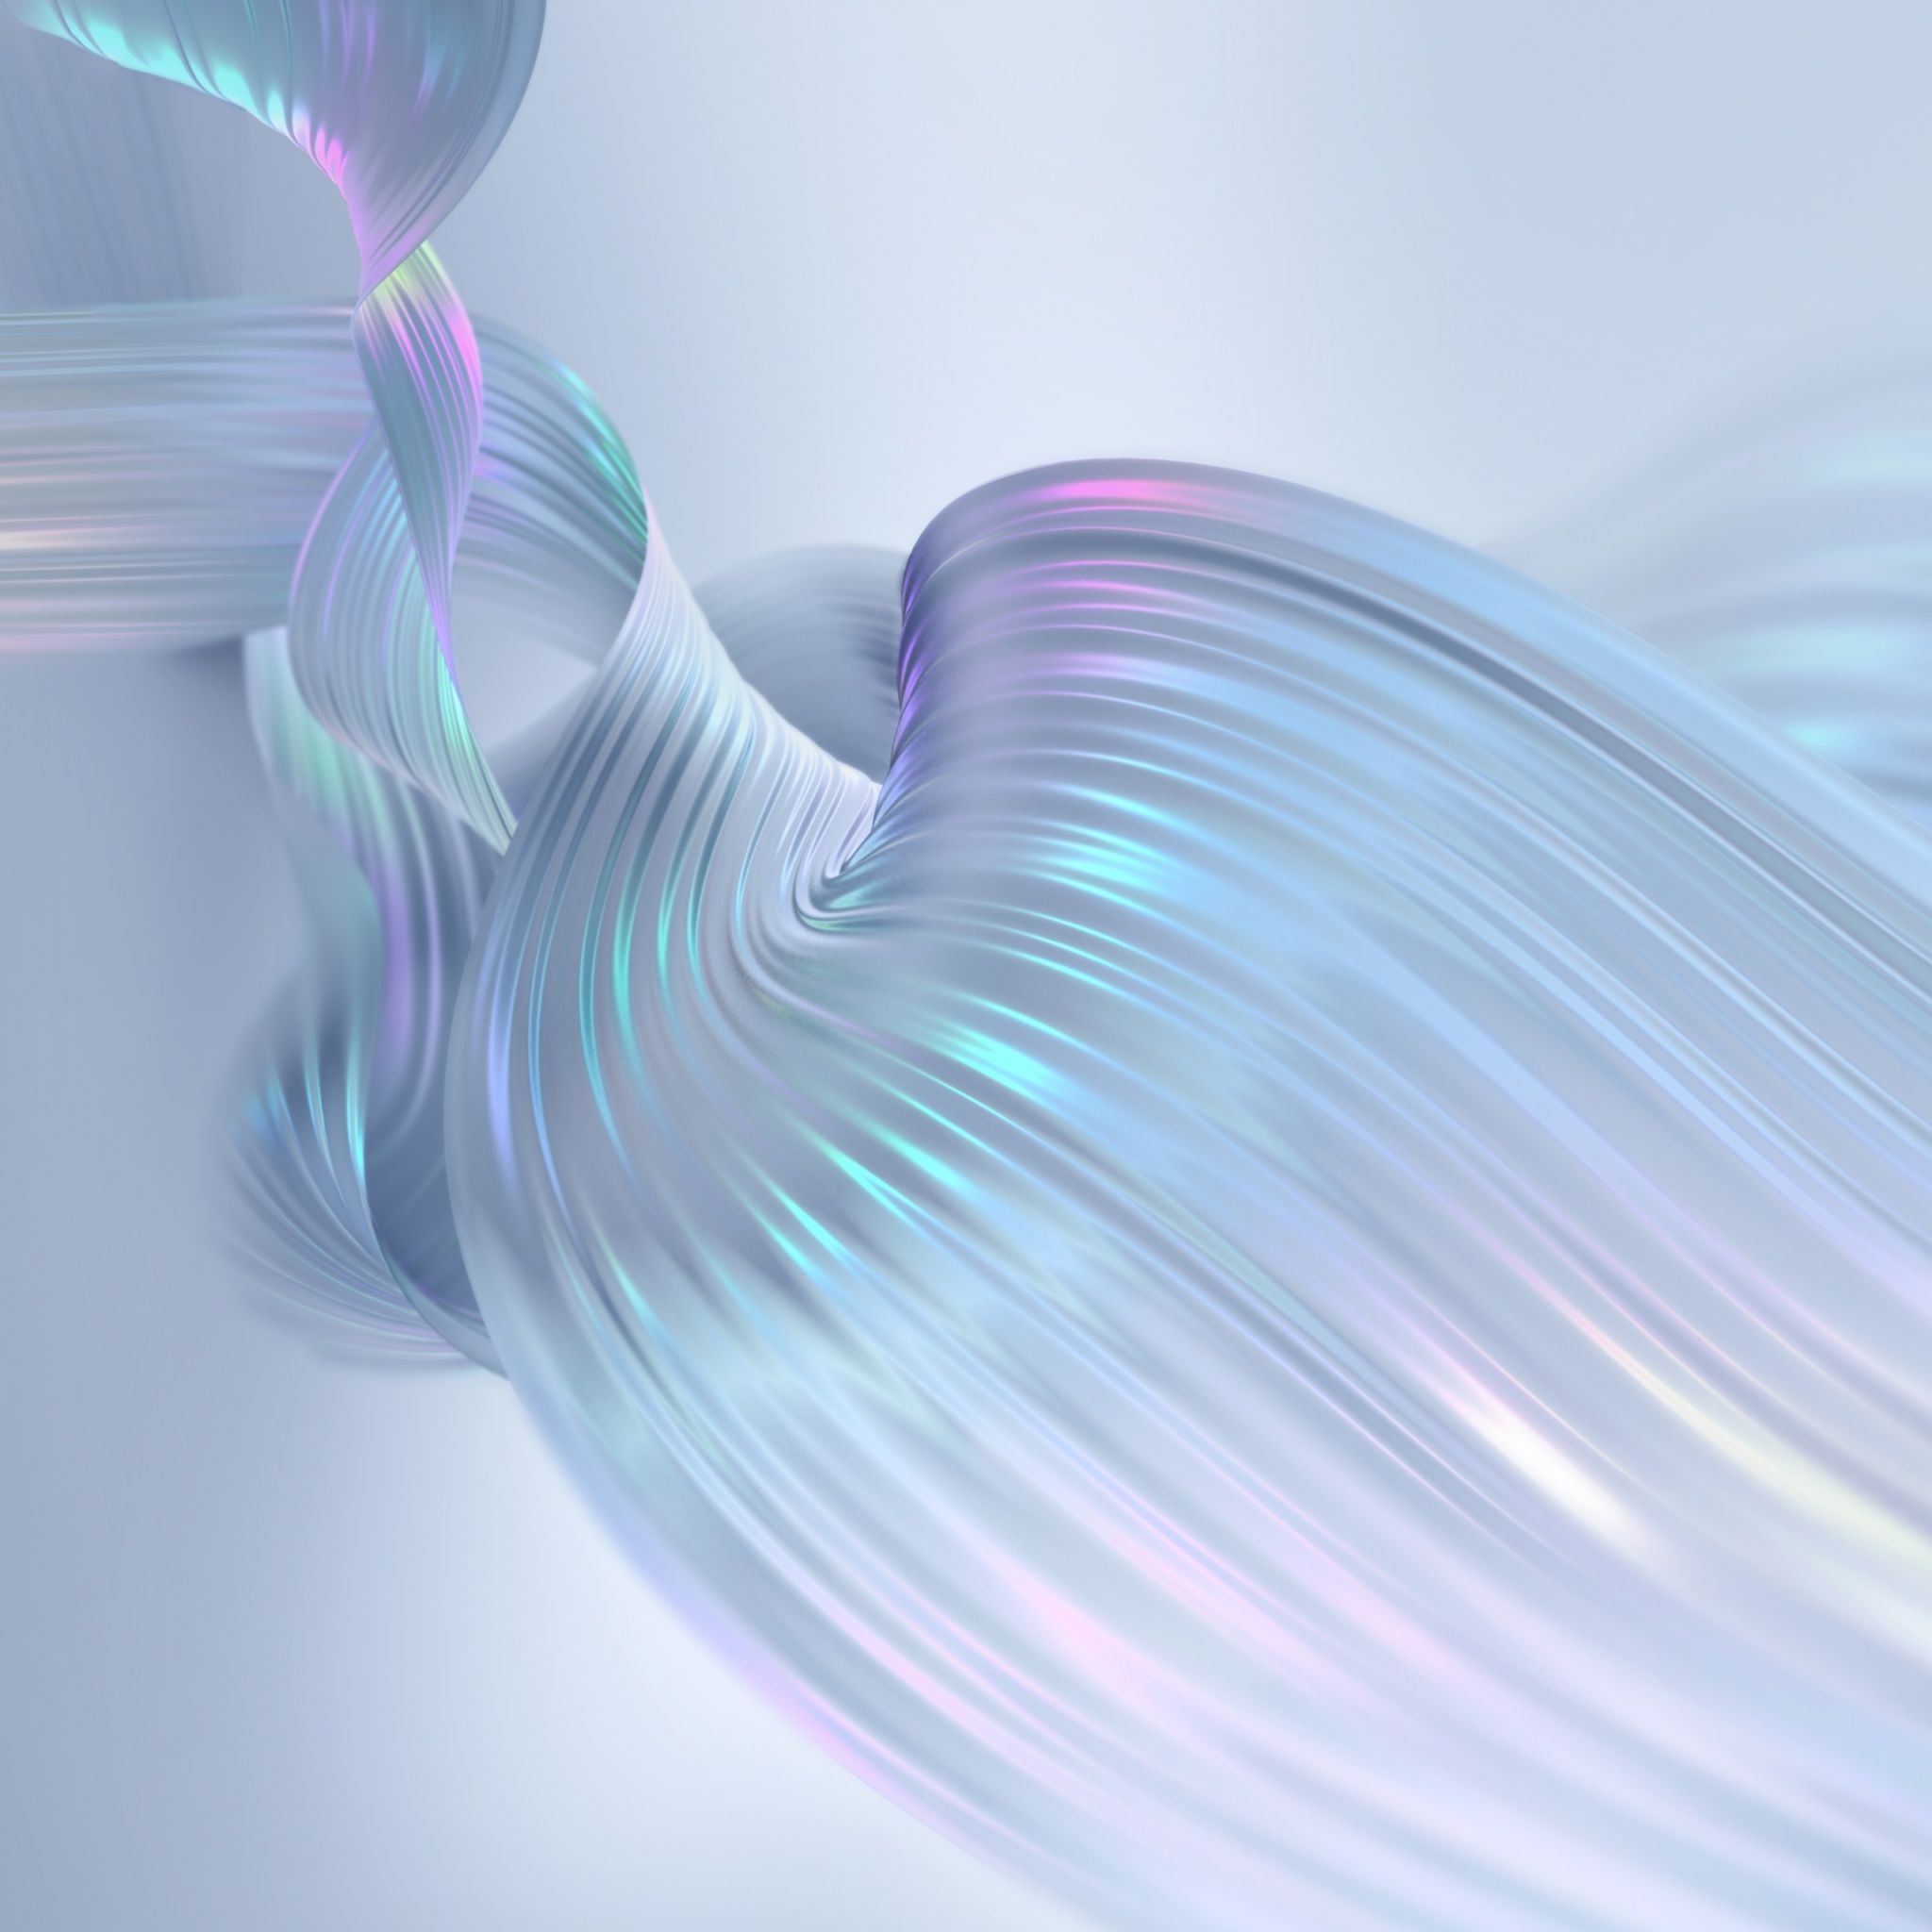 A blue and purple abstract image - Wings